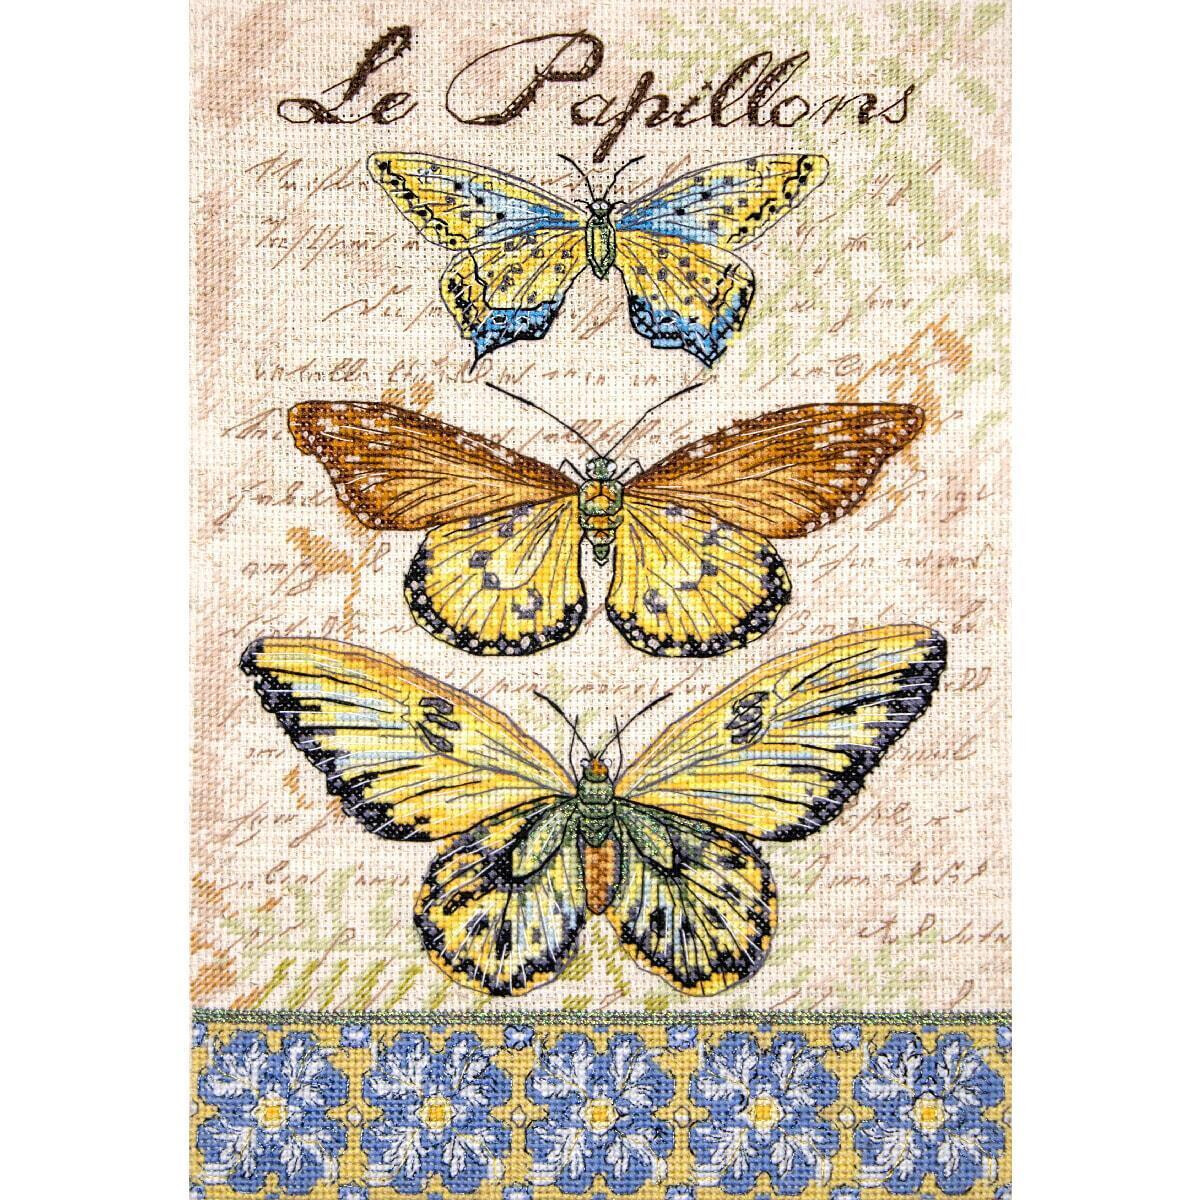 A decorative picture shows three butterflies arranged...